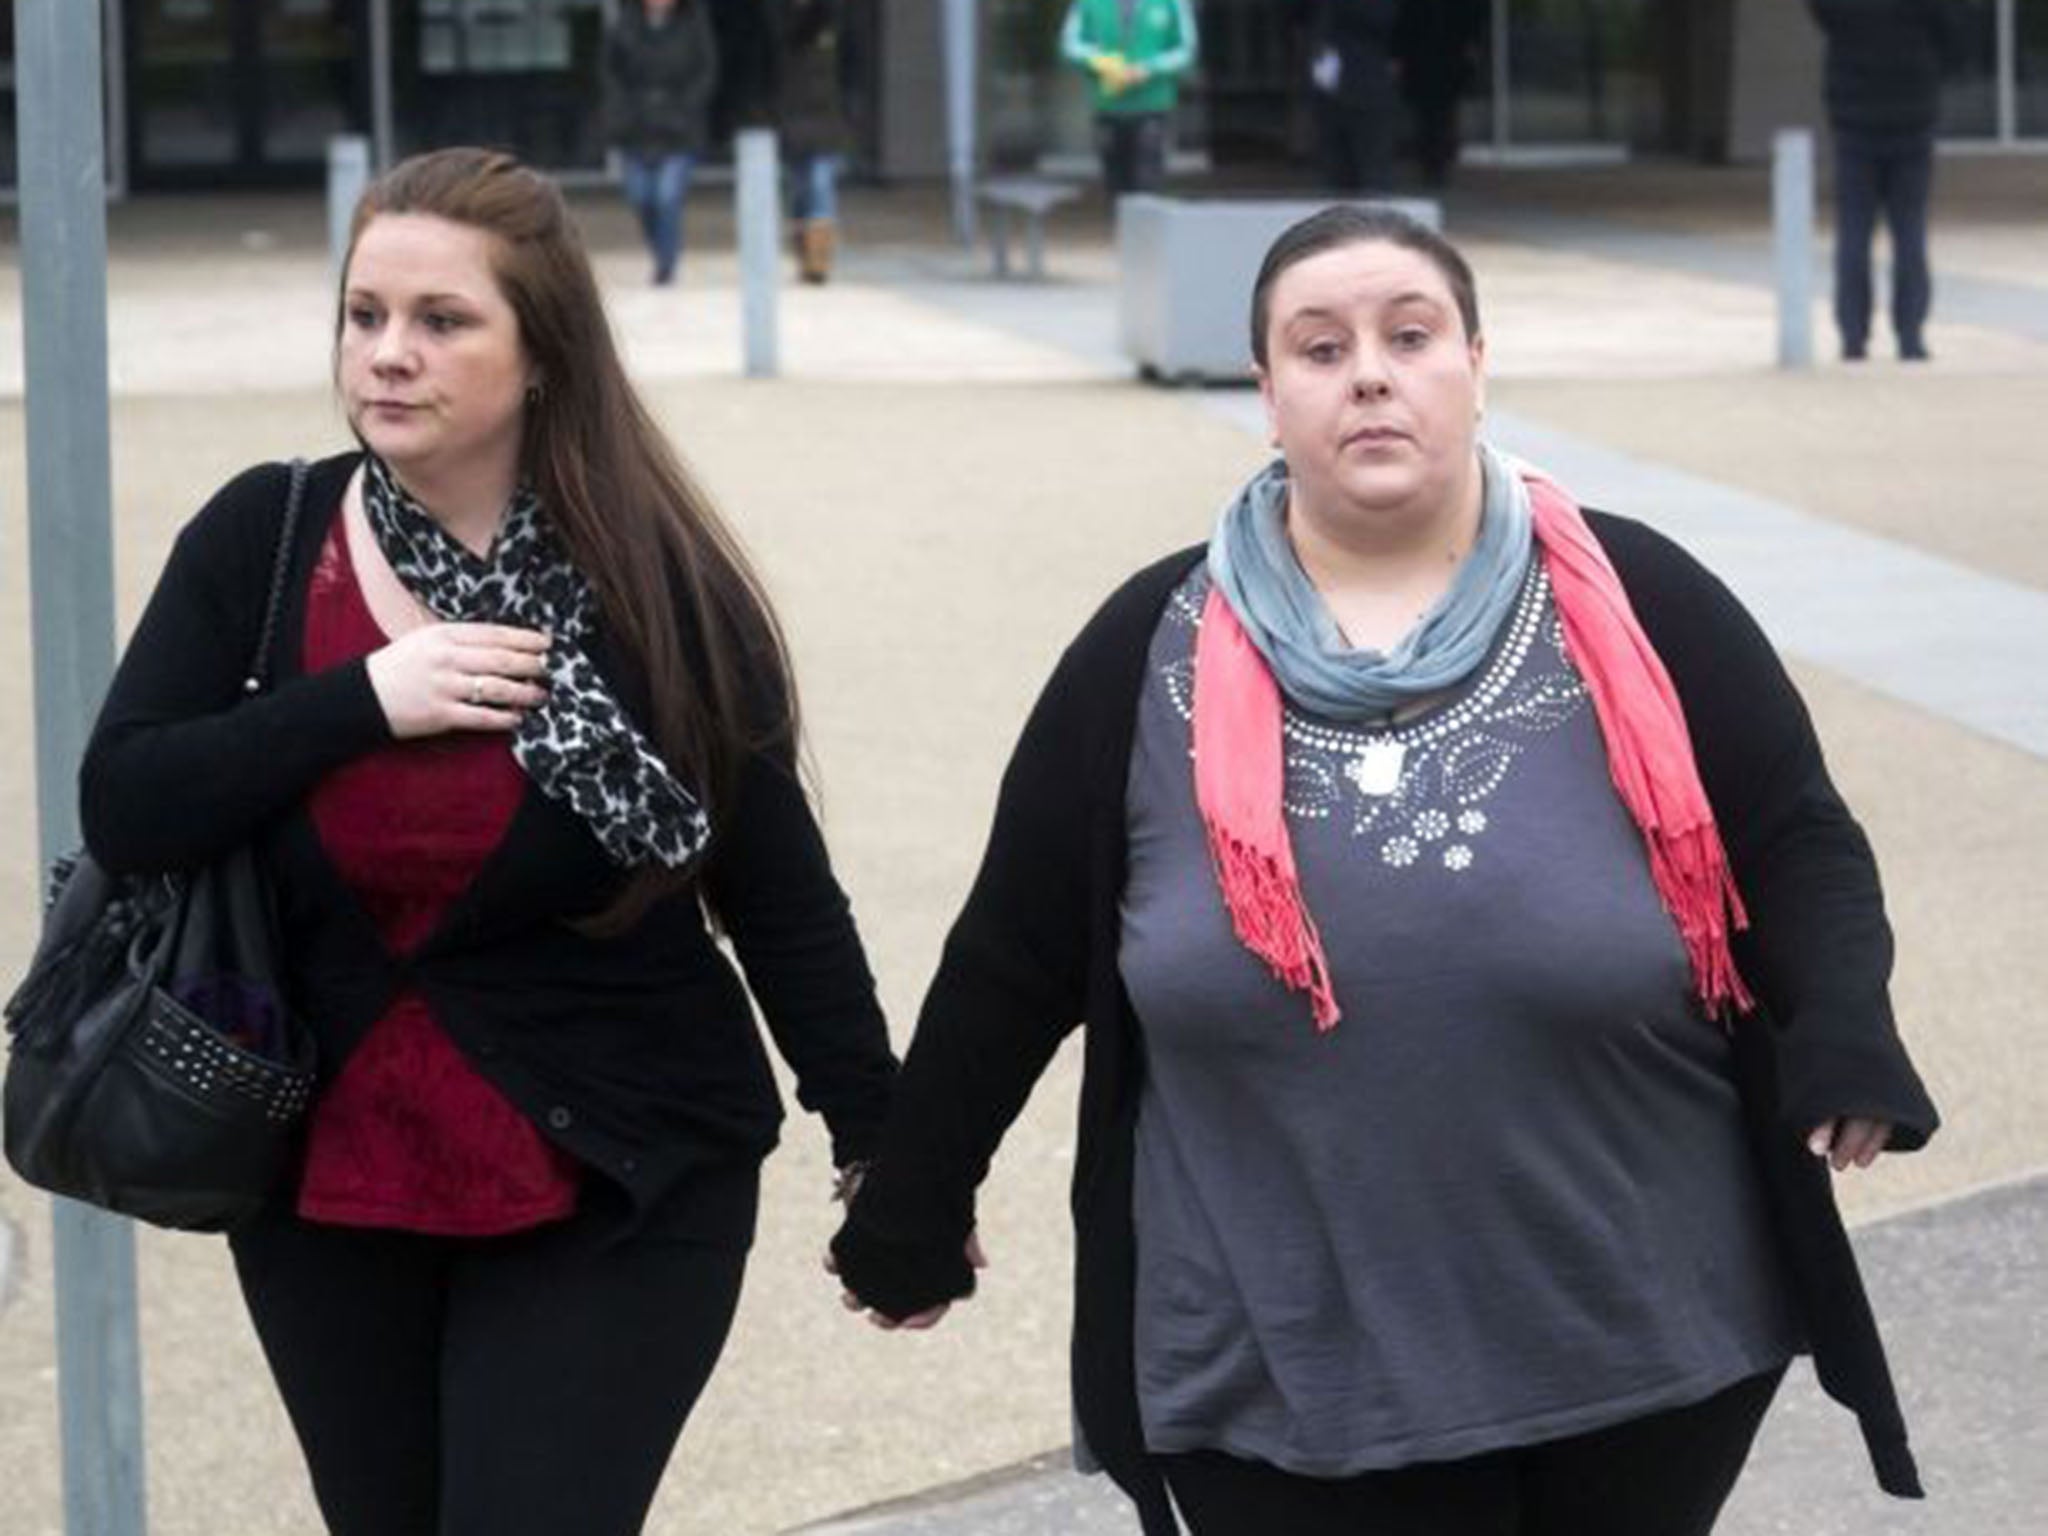 Rachel and Nyomi Fee (l-r) were accused of 'unyielding, heartless cruelty'